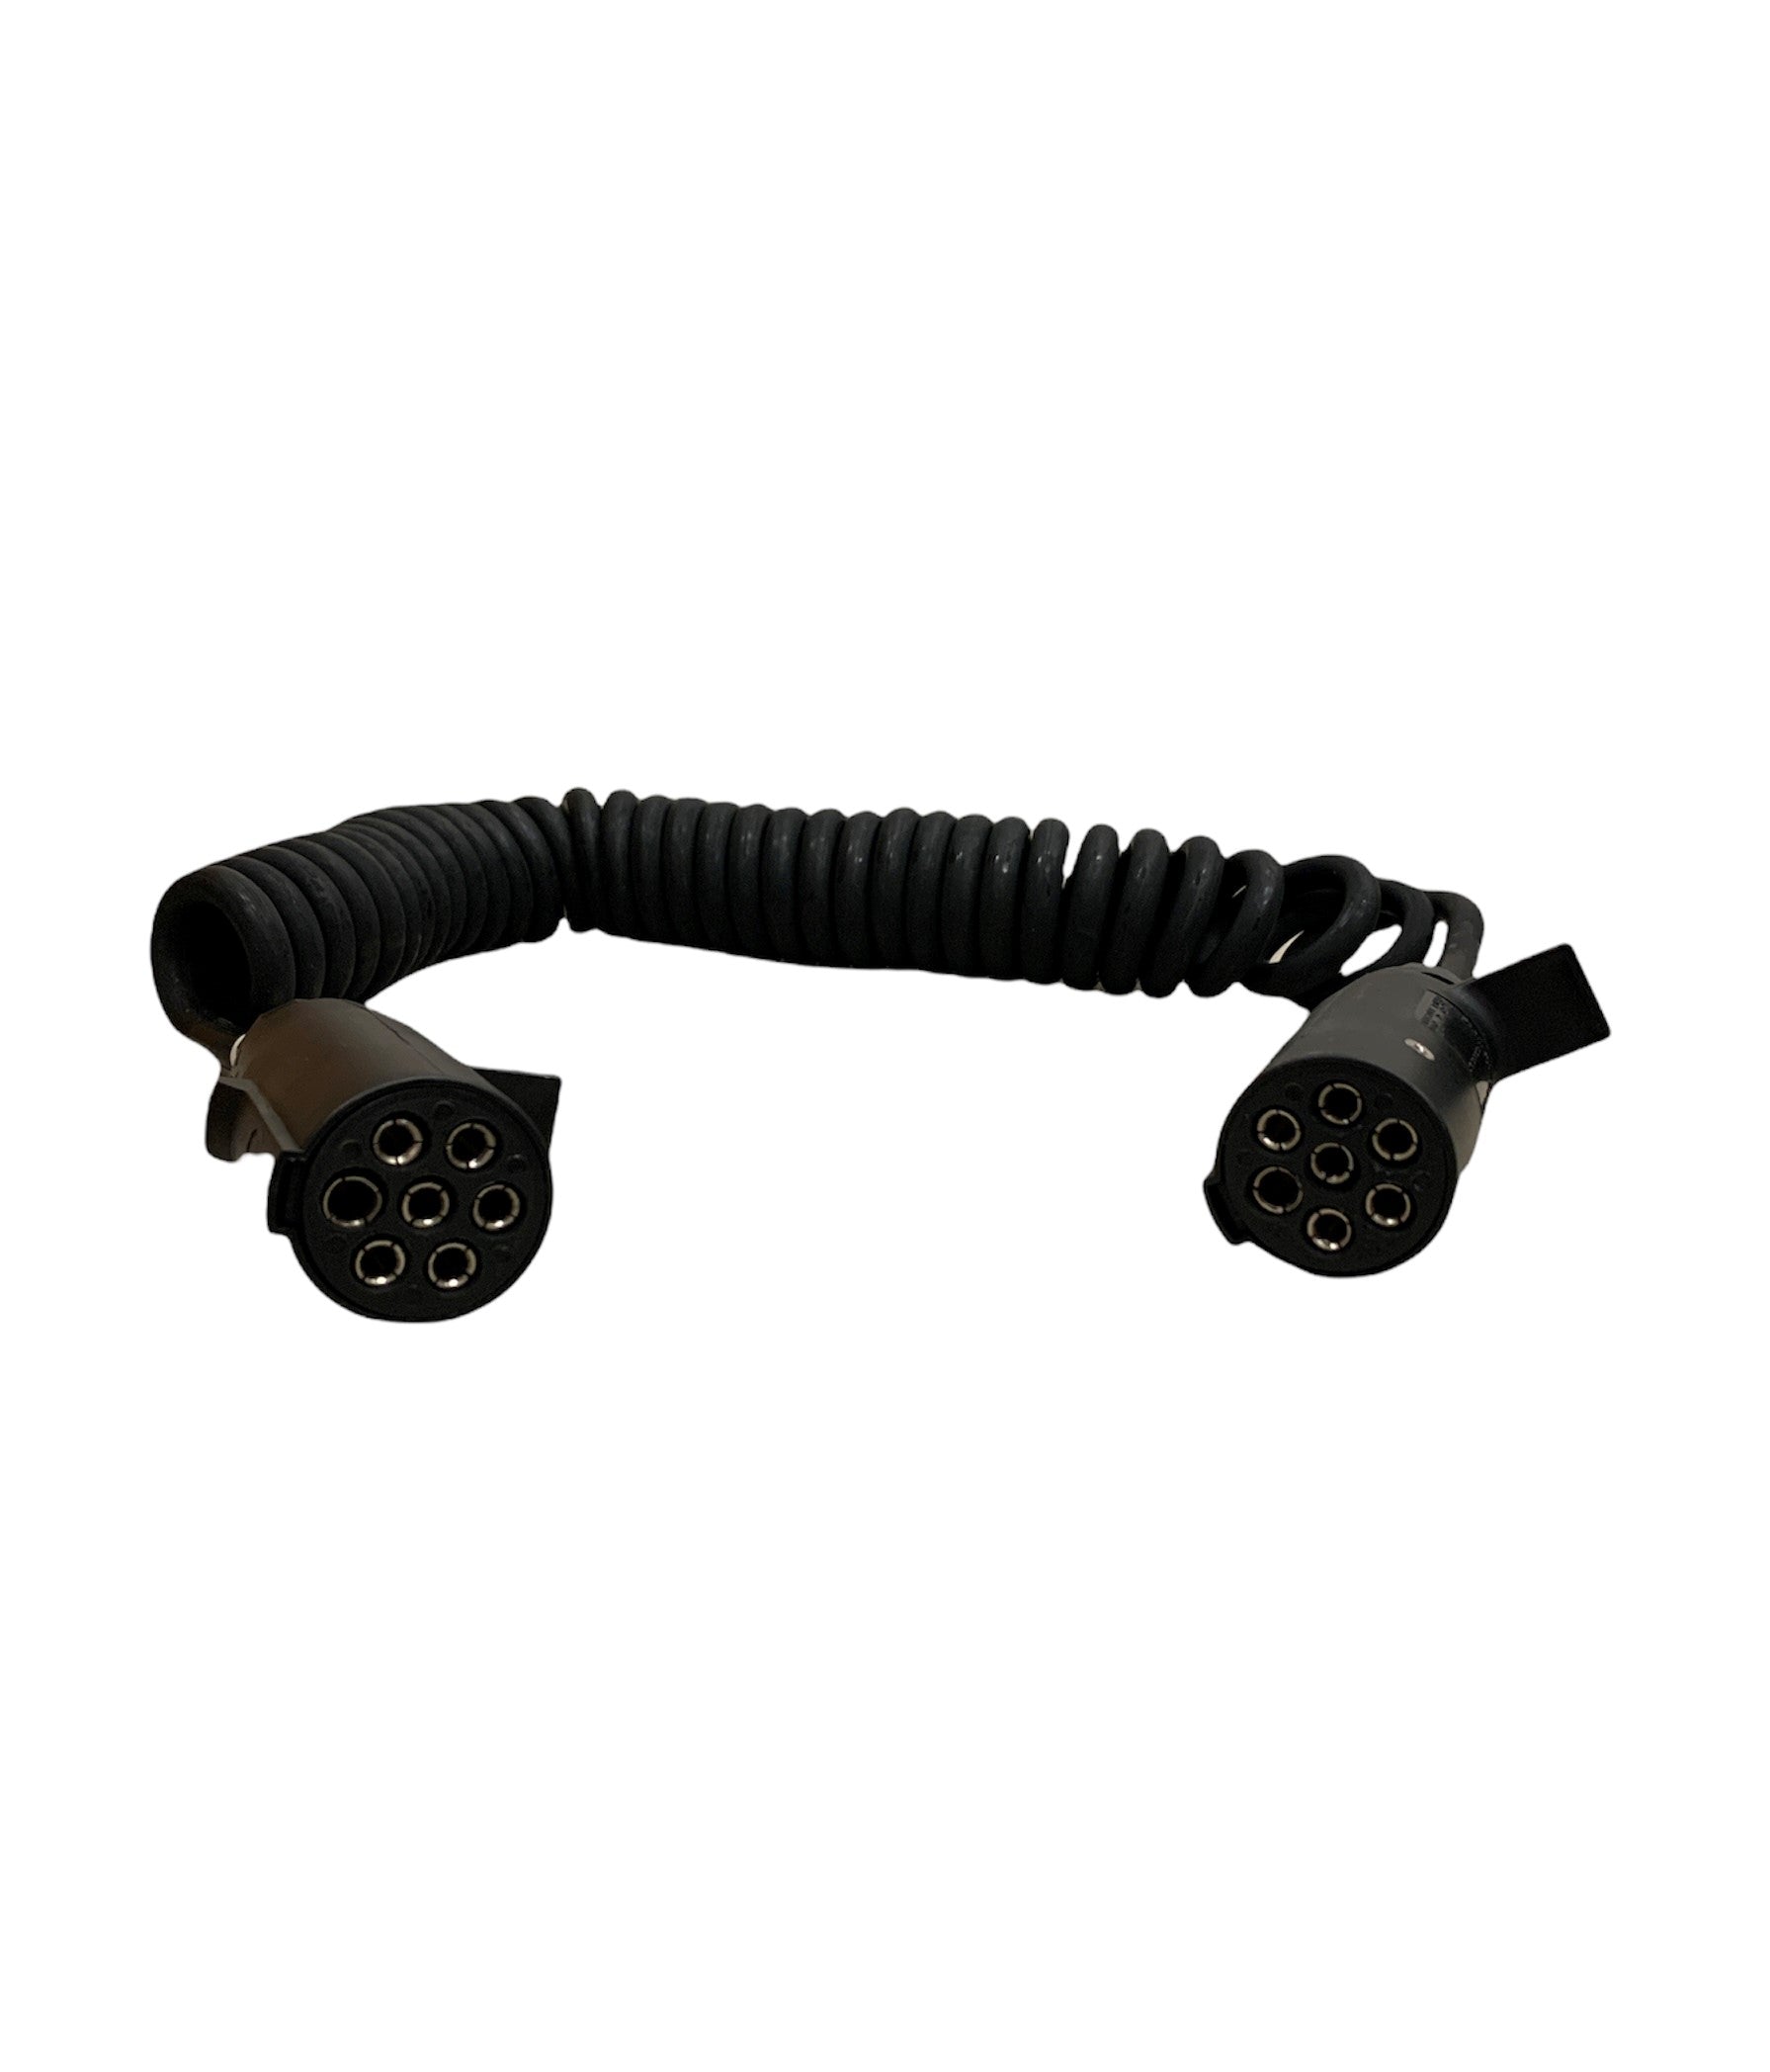 ABS 7 way coiled cable for Trucks (15Ft working Length, 7 Way).